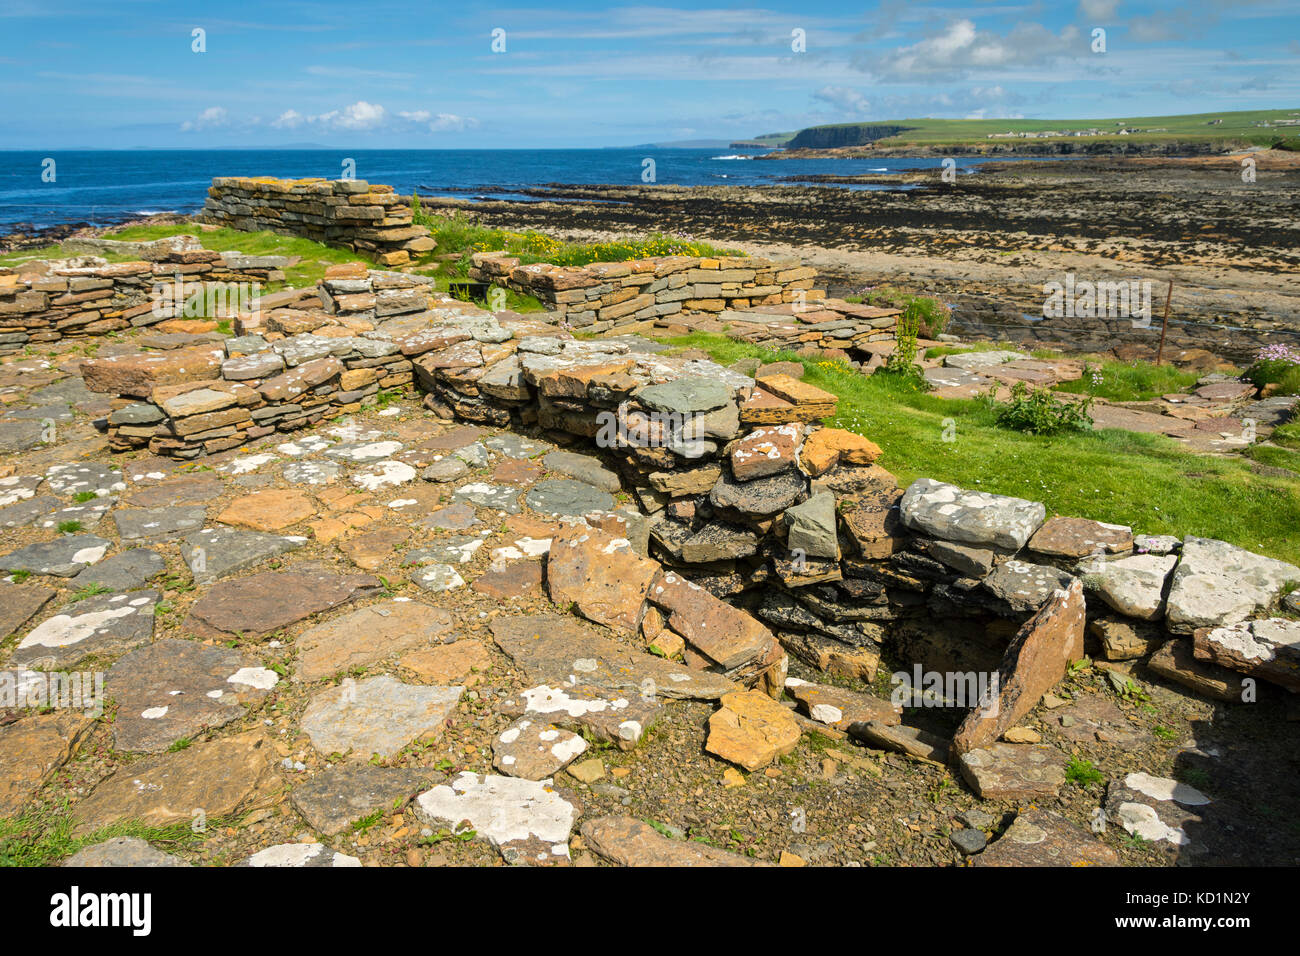 Remains of Celtic and Viking settlements on the Brough of Birsay, Orkney, Scotland, UK. Stock Photo